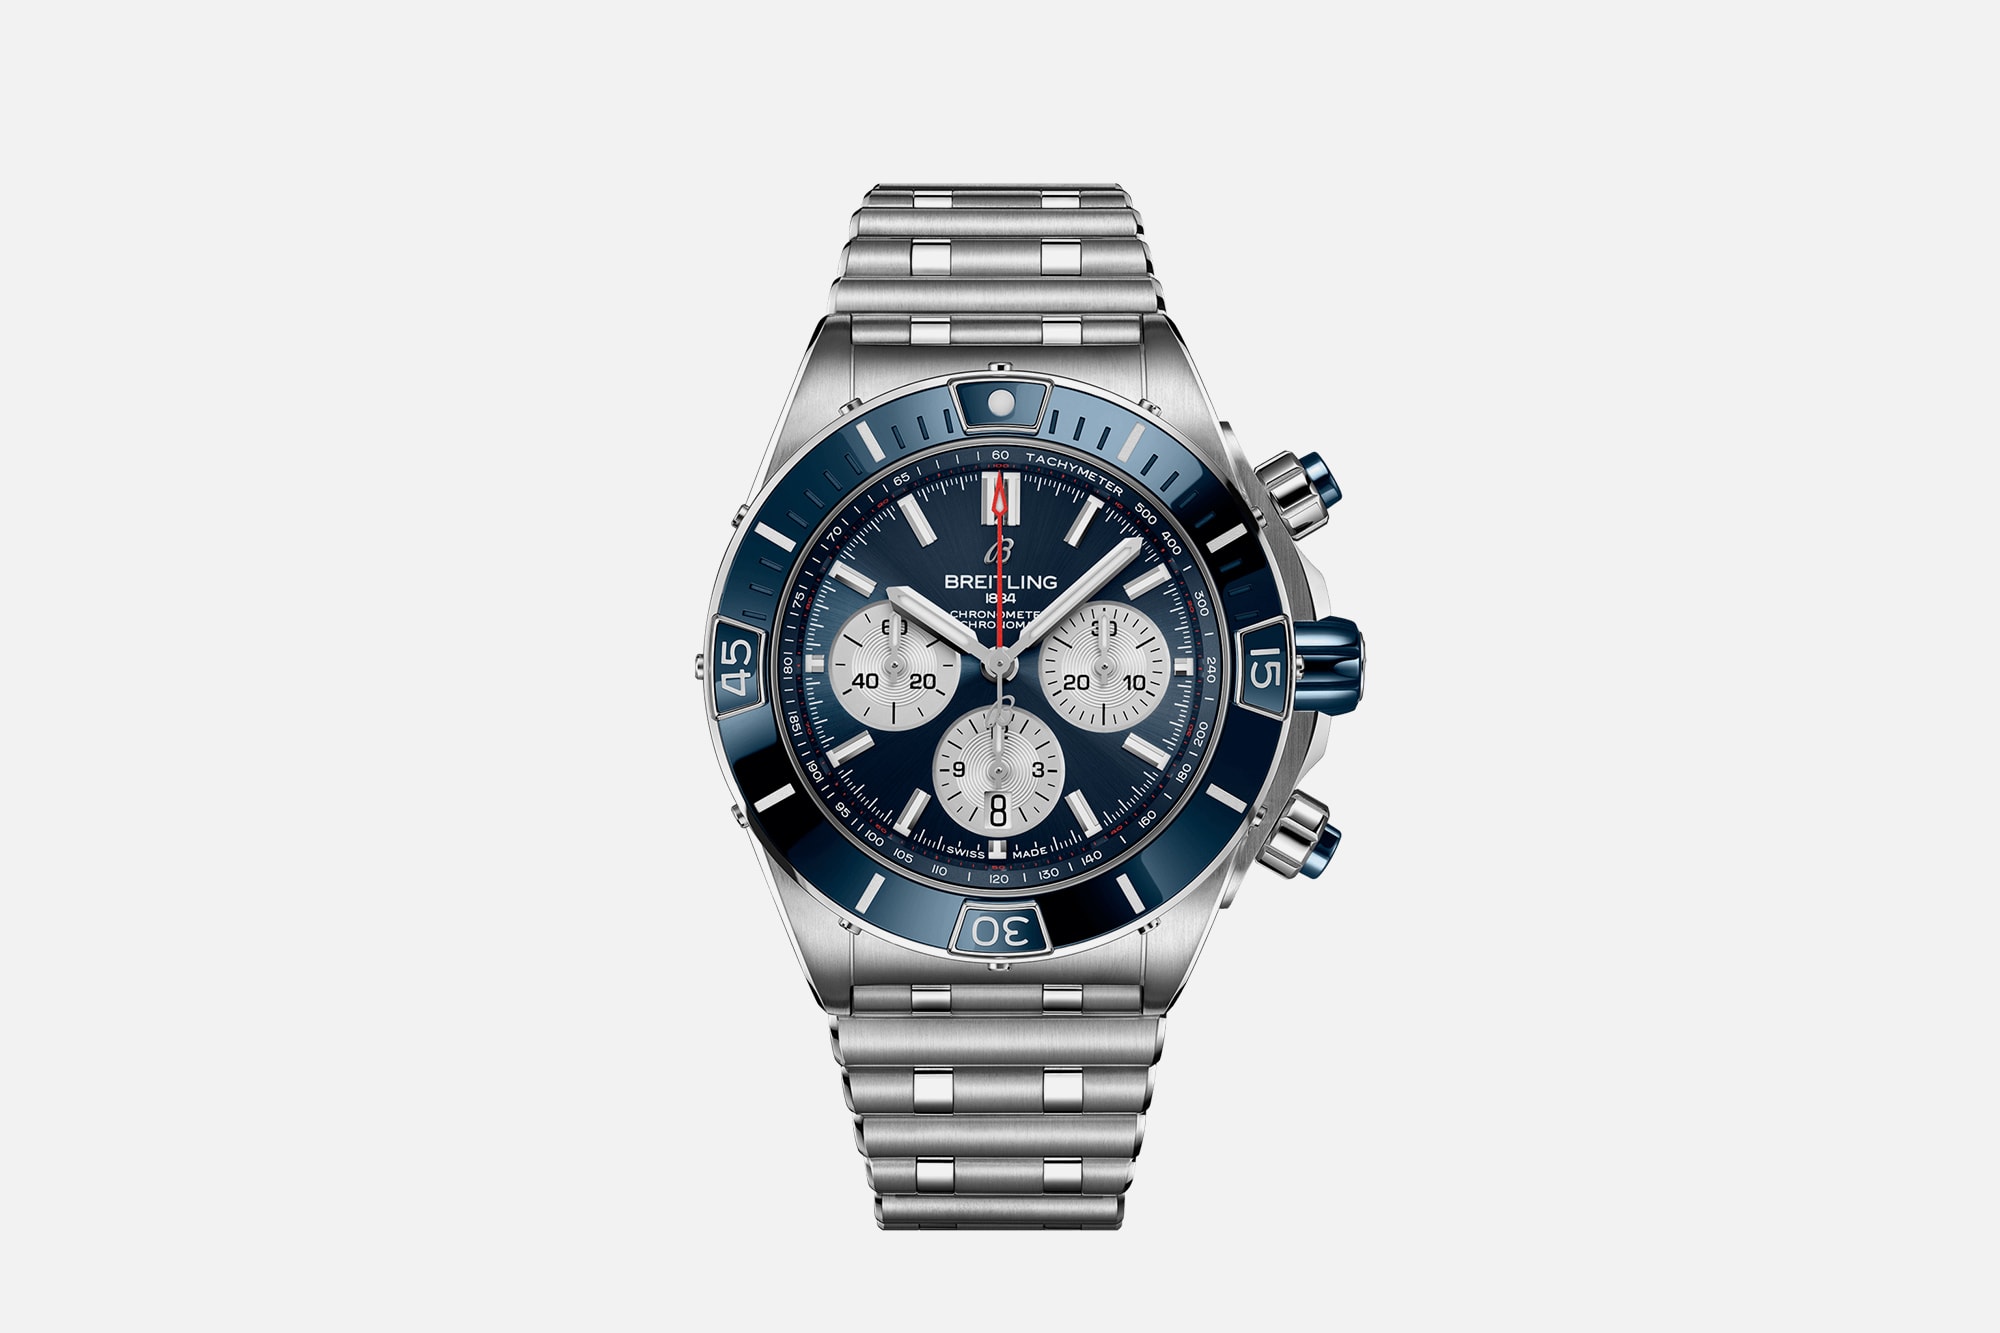 A Watch for your Watch: The New Breitling Super Chronomat Collection